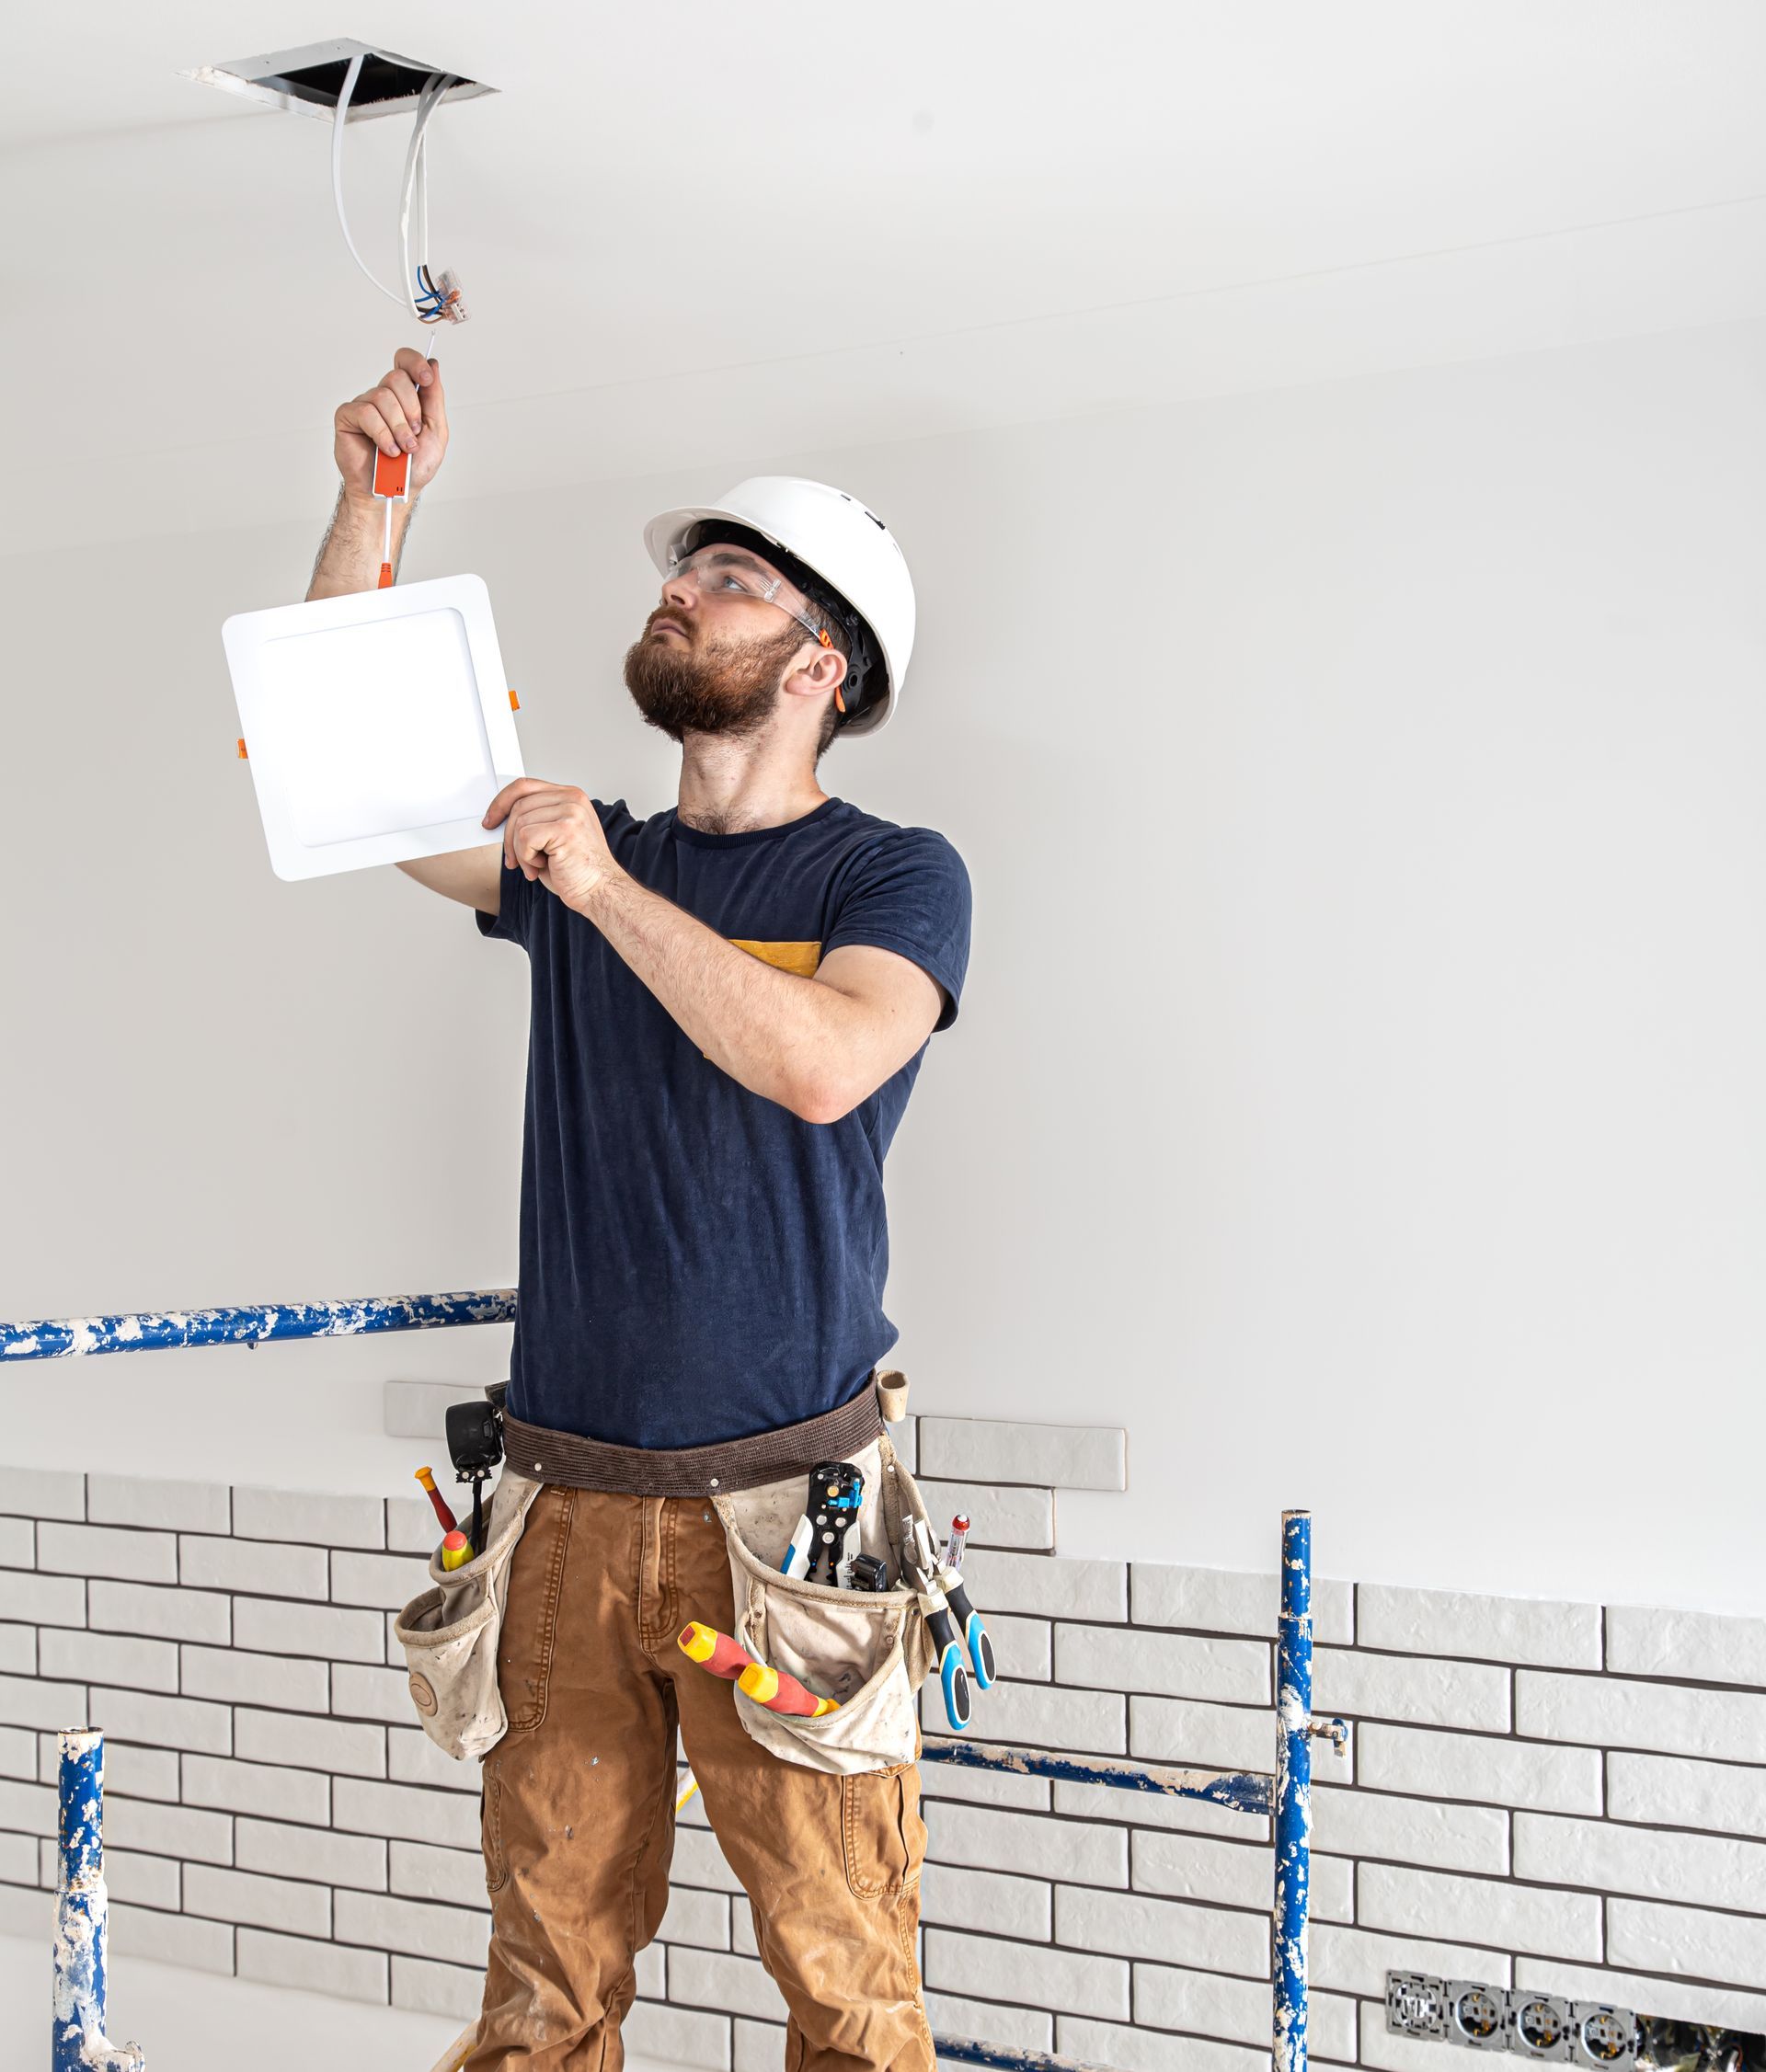 electrician-builder-with-beard-worker-white-helmet-work-installation-lamps-height-professional-overalls-with-drill-background-repair-site